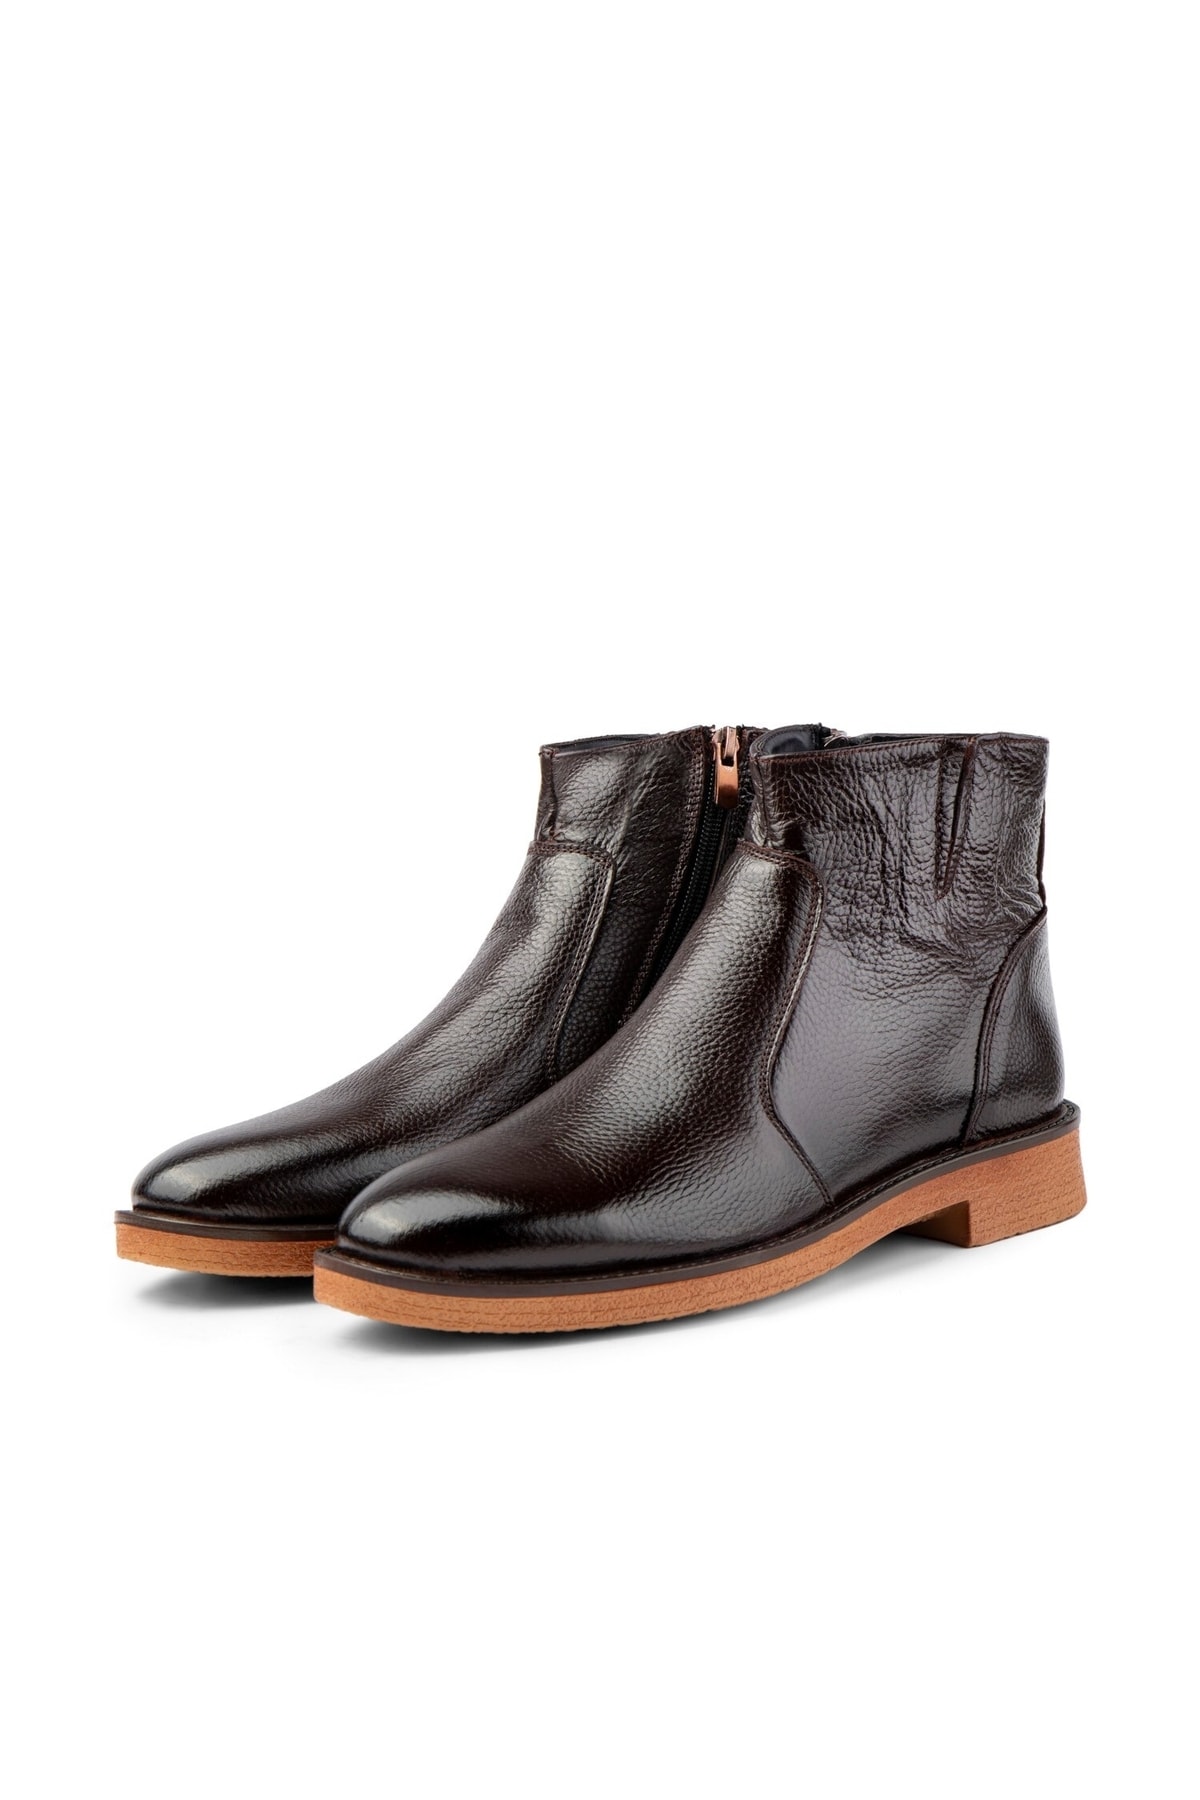 Ducavelli Bristol Genuine Leather Non-Slip Sole Zippered Chelsea Daily Boots Brown